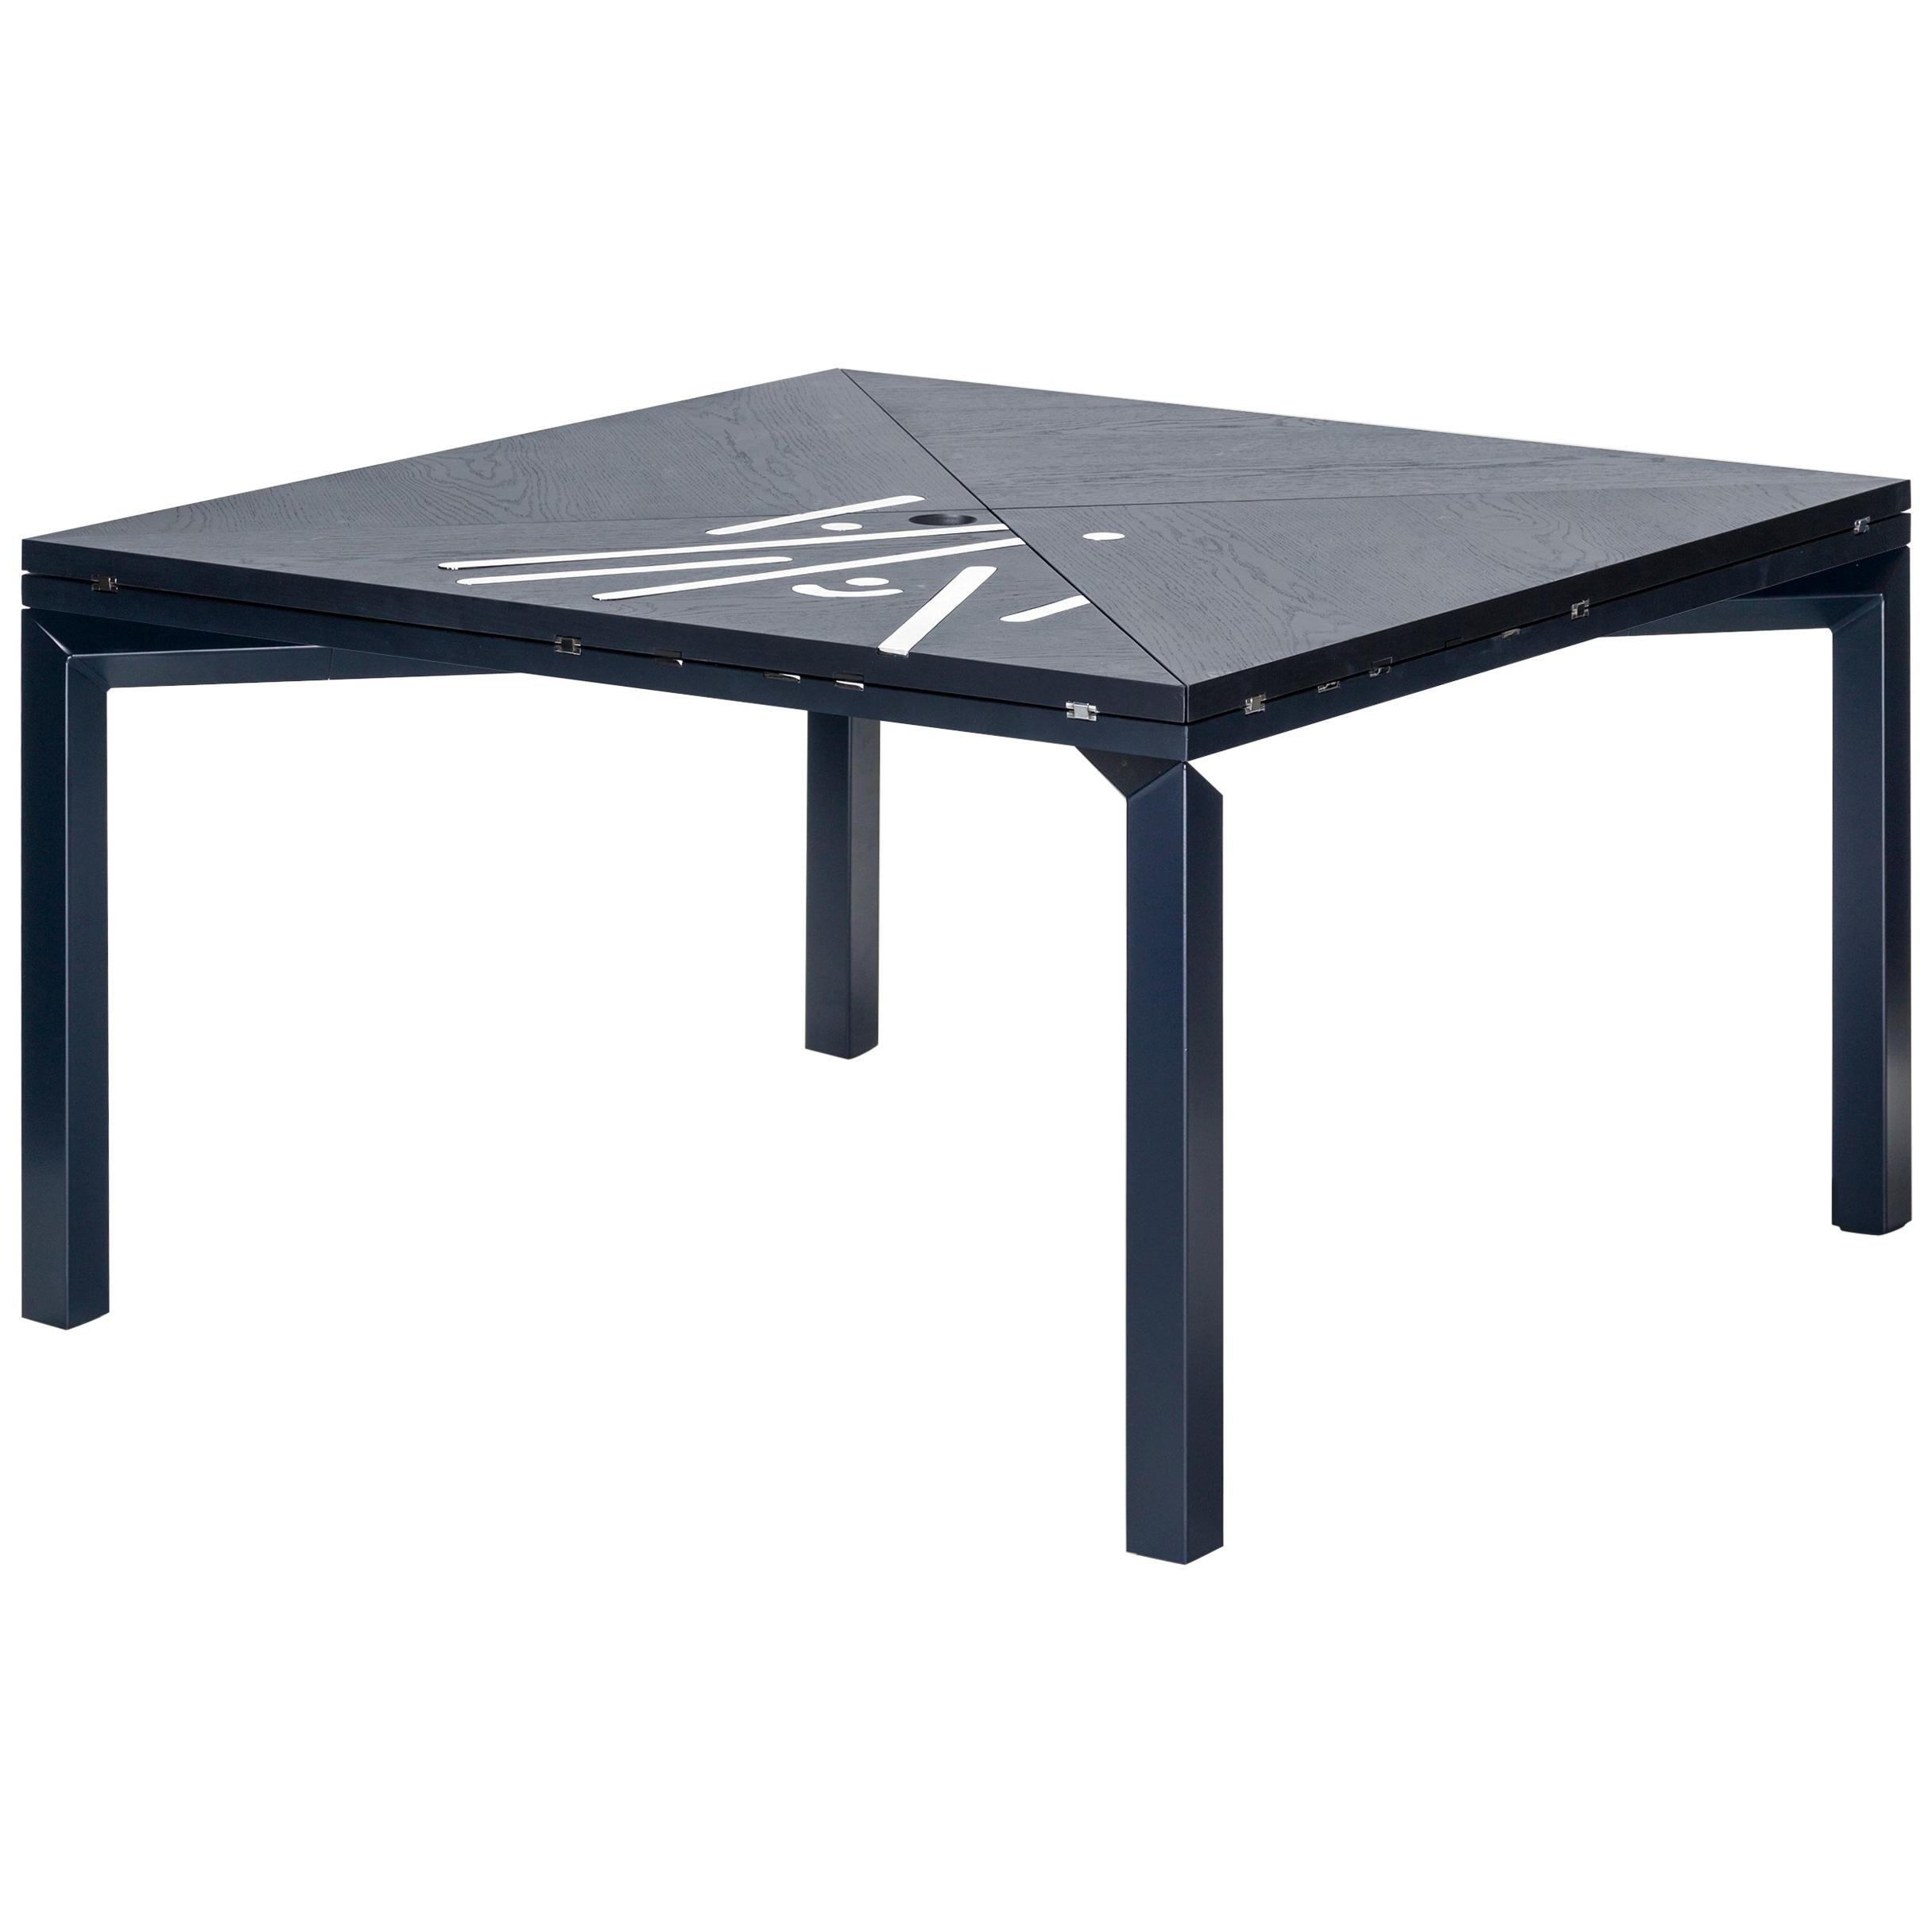 Alella table designed by Lluis Clotet.

Limited edition of 8 units, 2 artist proofs and 2 prototypes.
DM, oak veneered and stained in dark blue RAL 5004.
Legs in an iron rectangular tube lacquered in the same color as the top.
Decorative